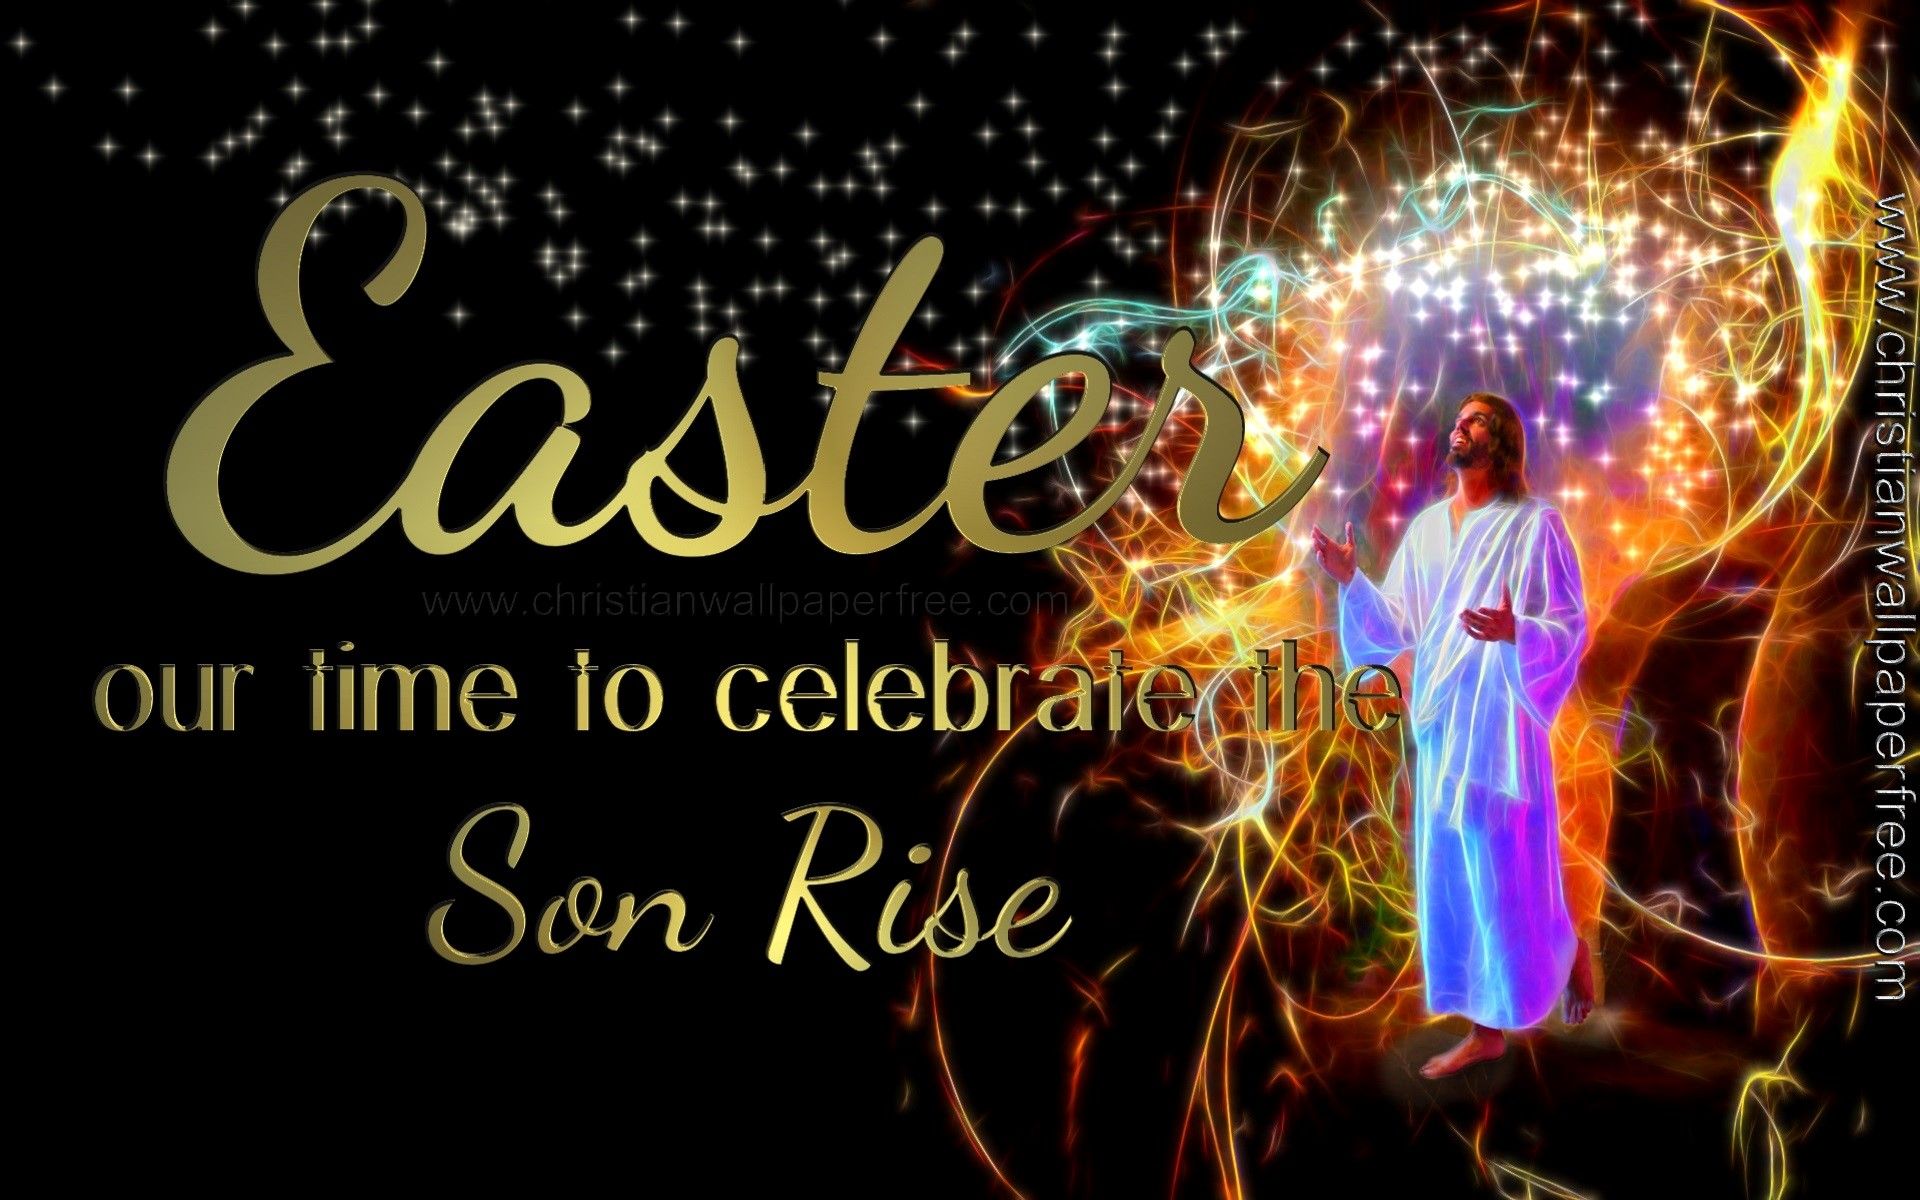 Easter our time to celebrate